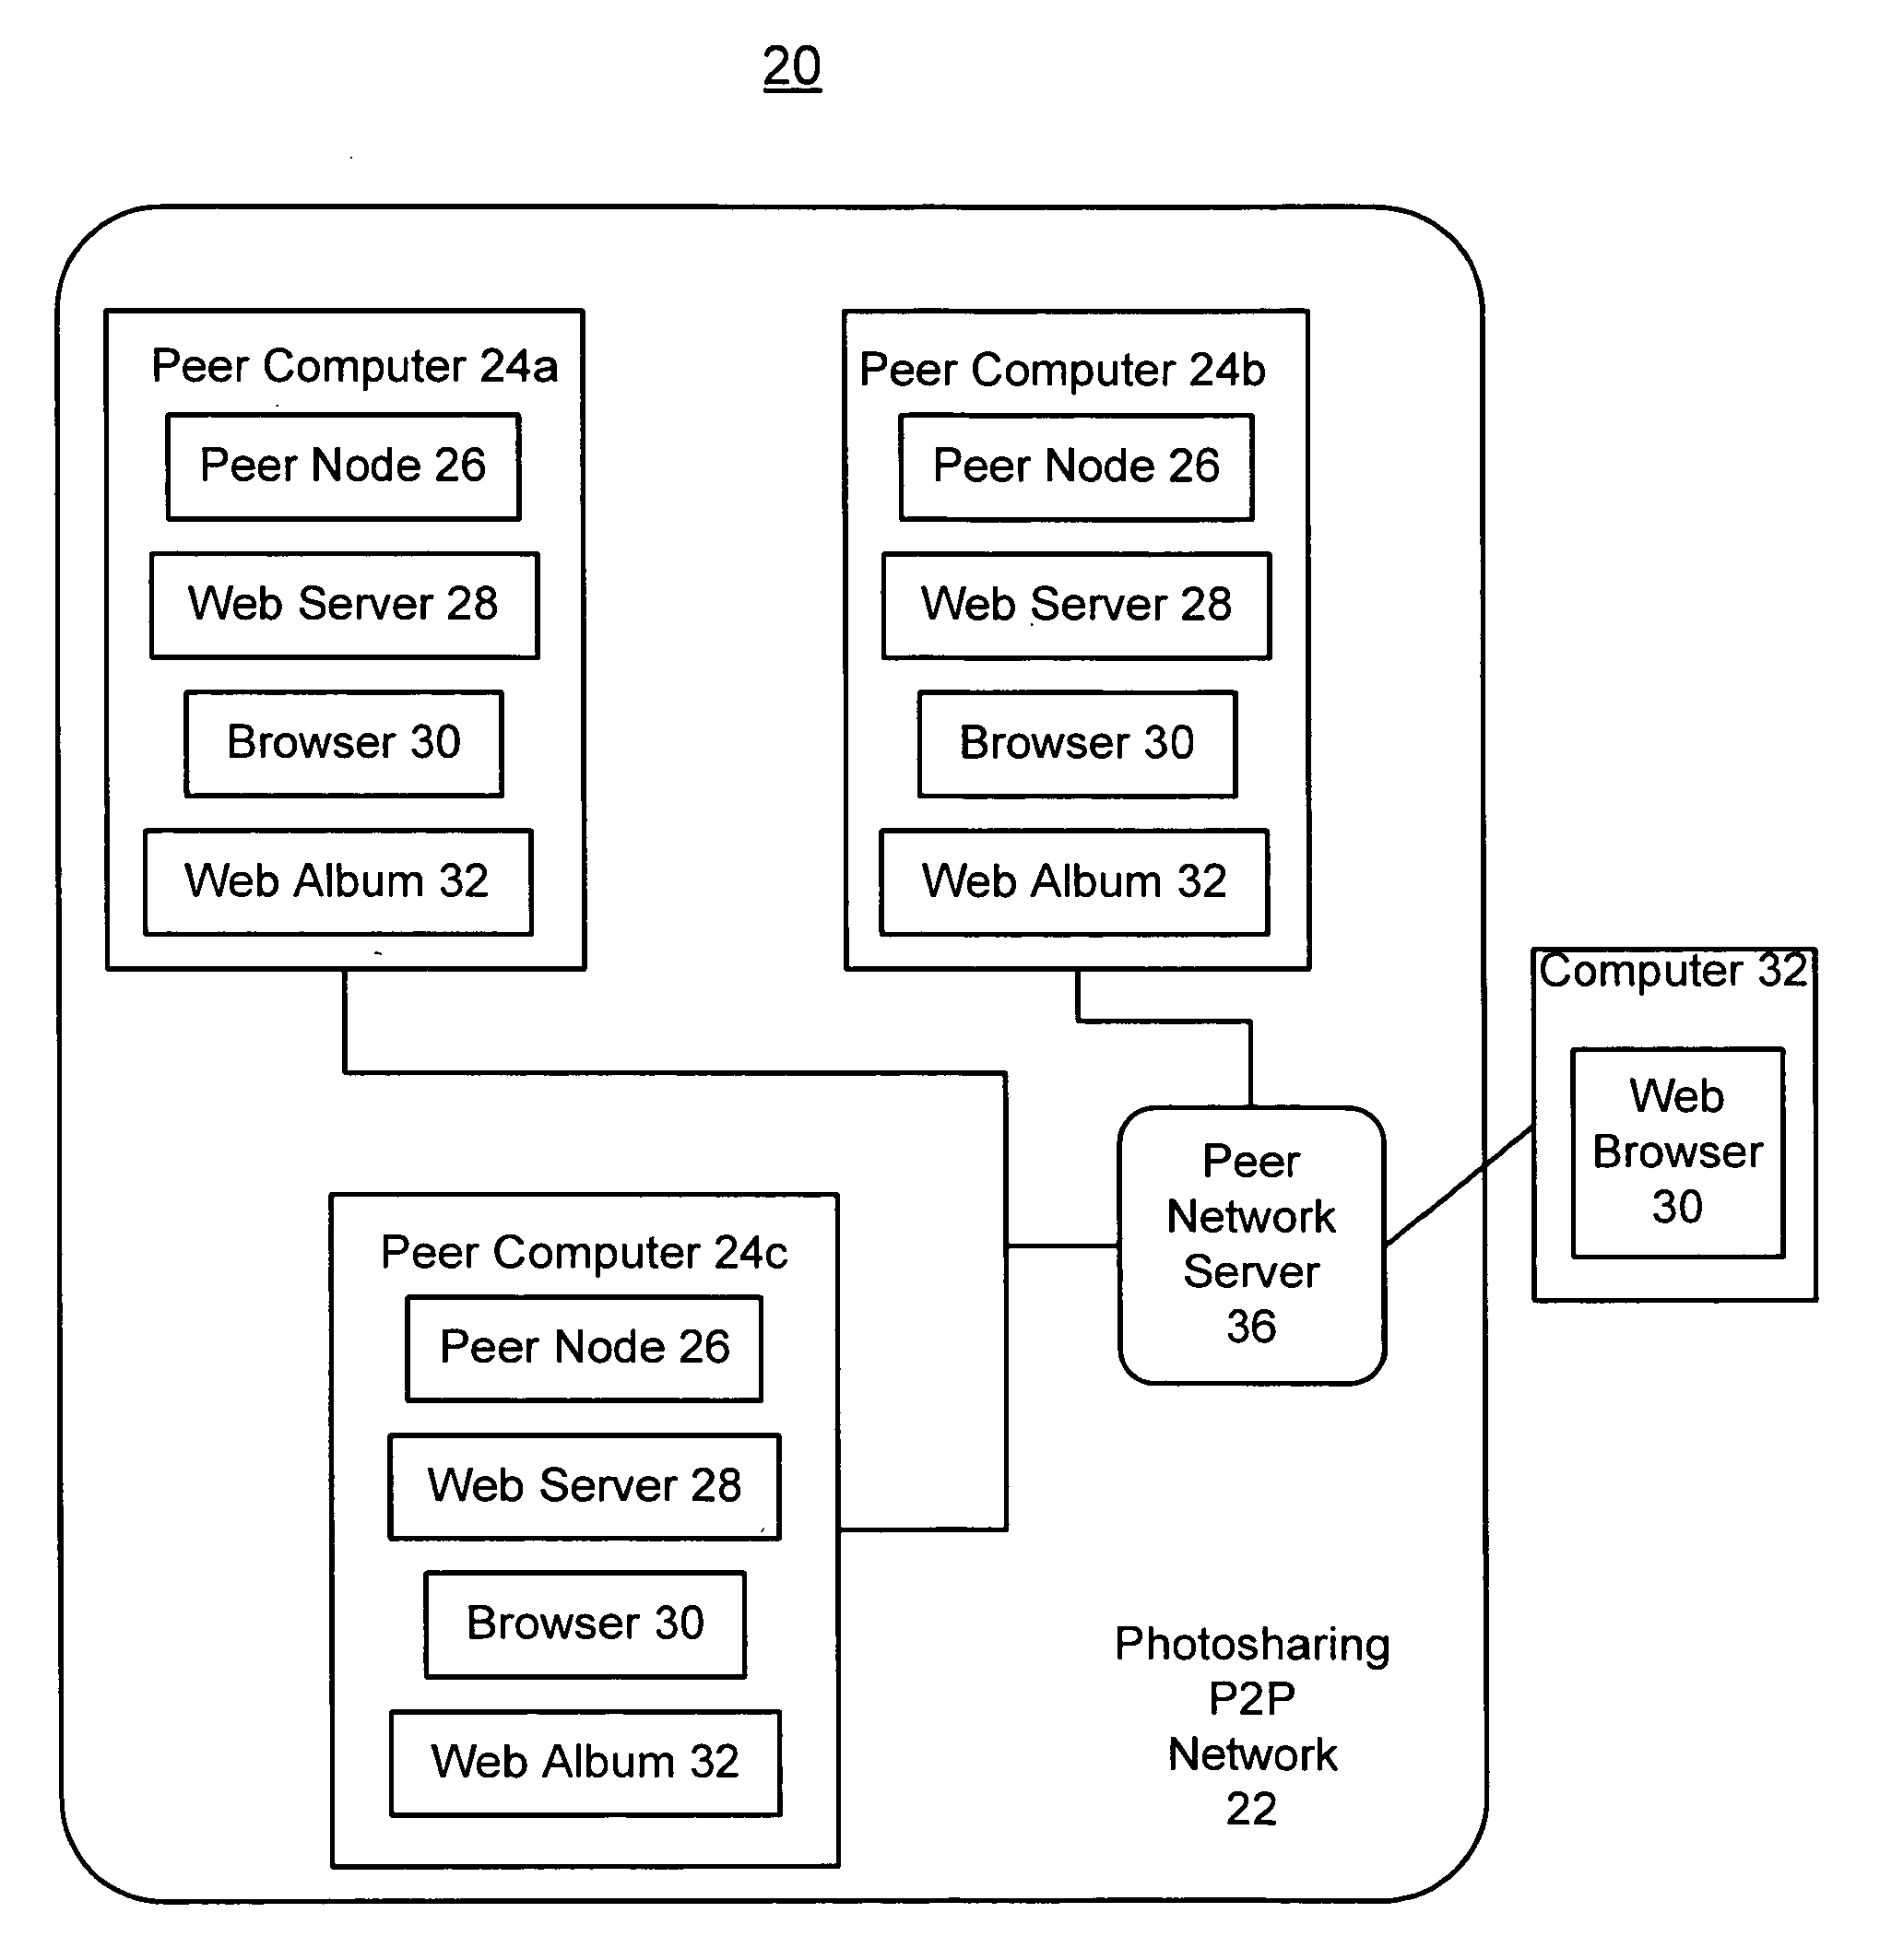 Automatic creation of bidirectional online album links in a peer-to-peer photo sharing network